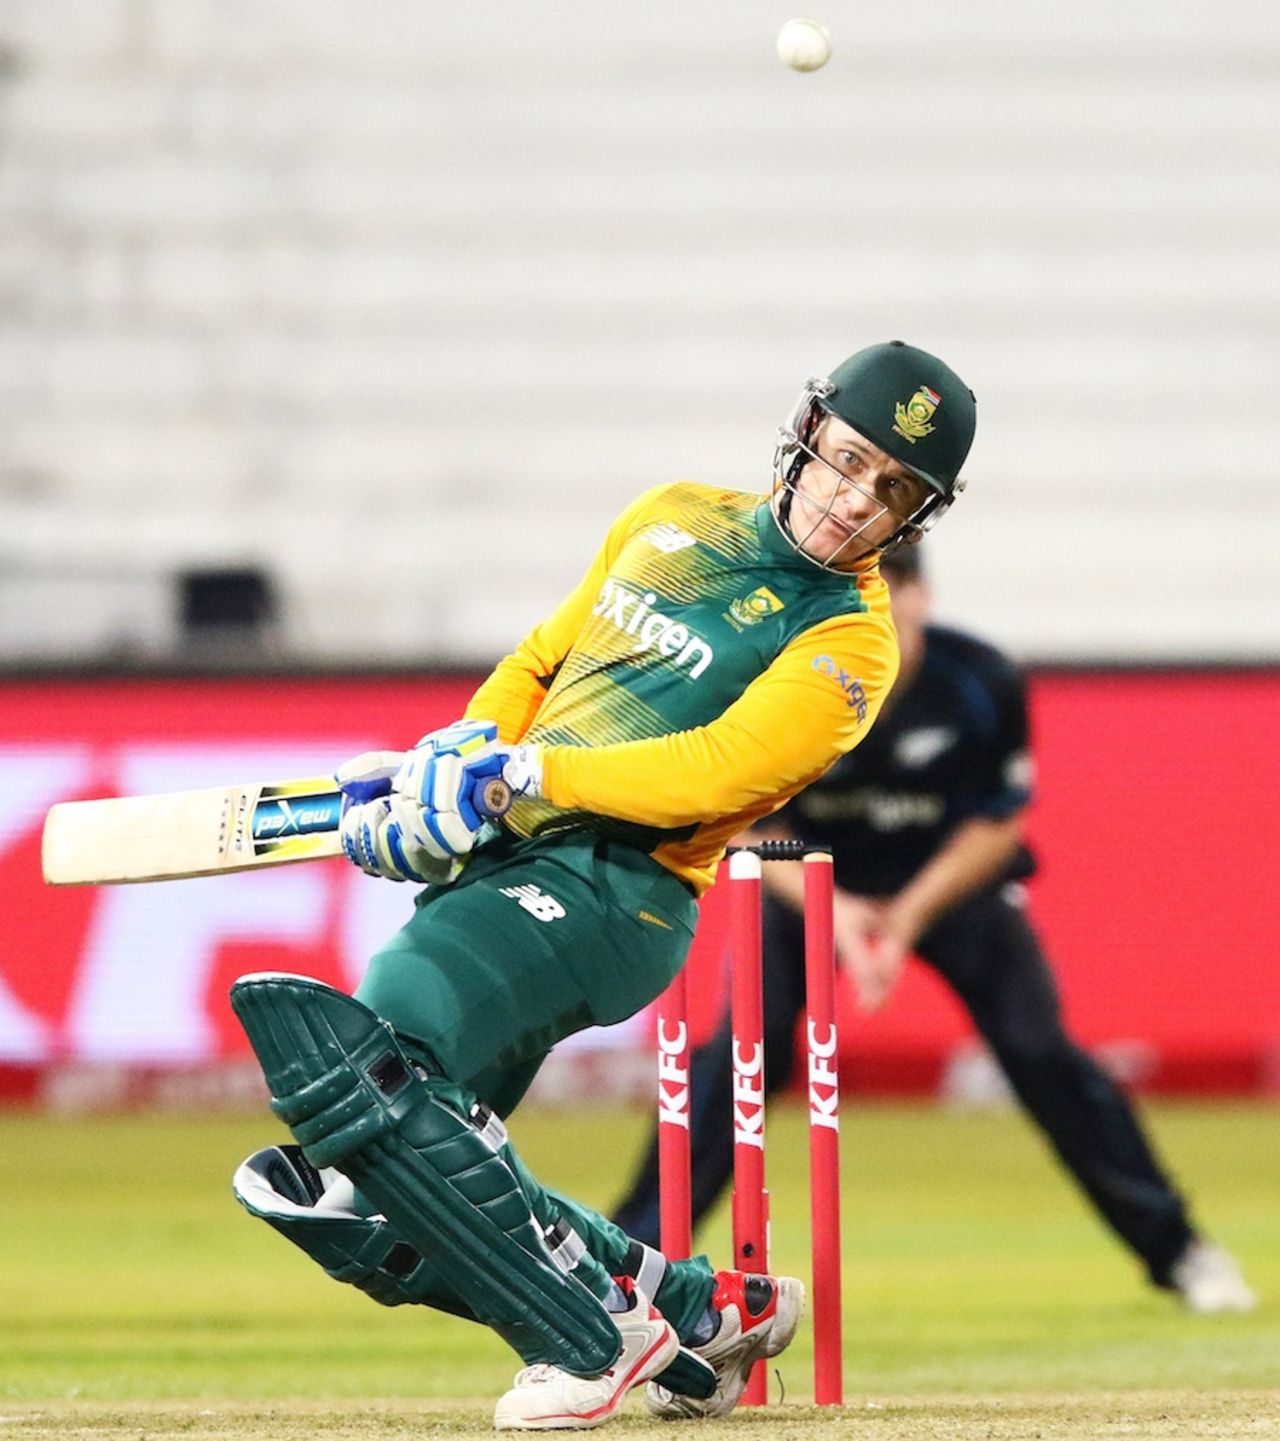 Morne van Wyk was peppered with a few short ones from Adam Milne, South Africa v New Zealand, 1st T20I, Durban, August 14, 2015